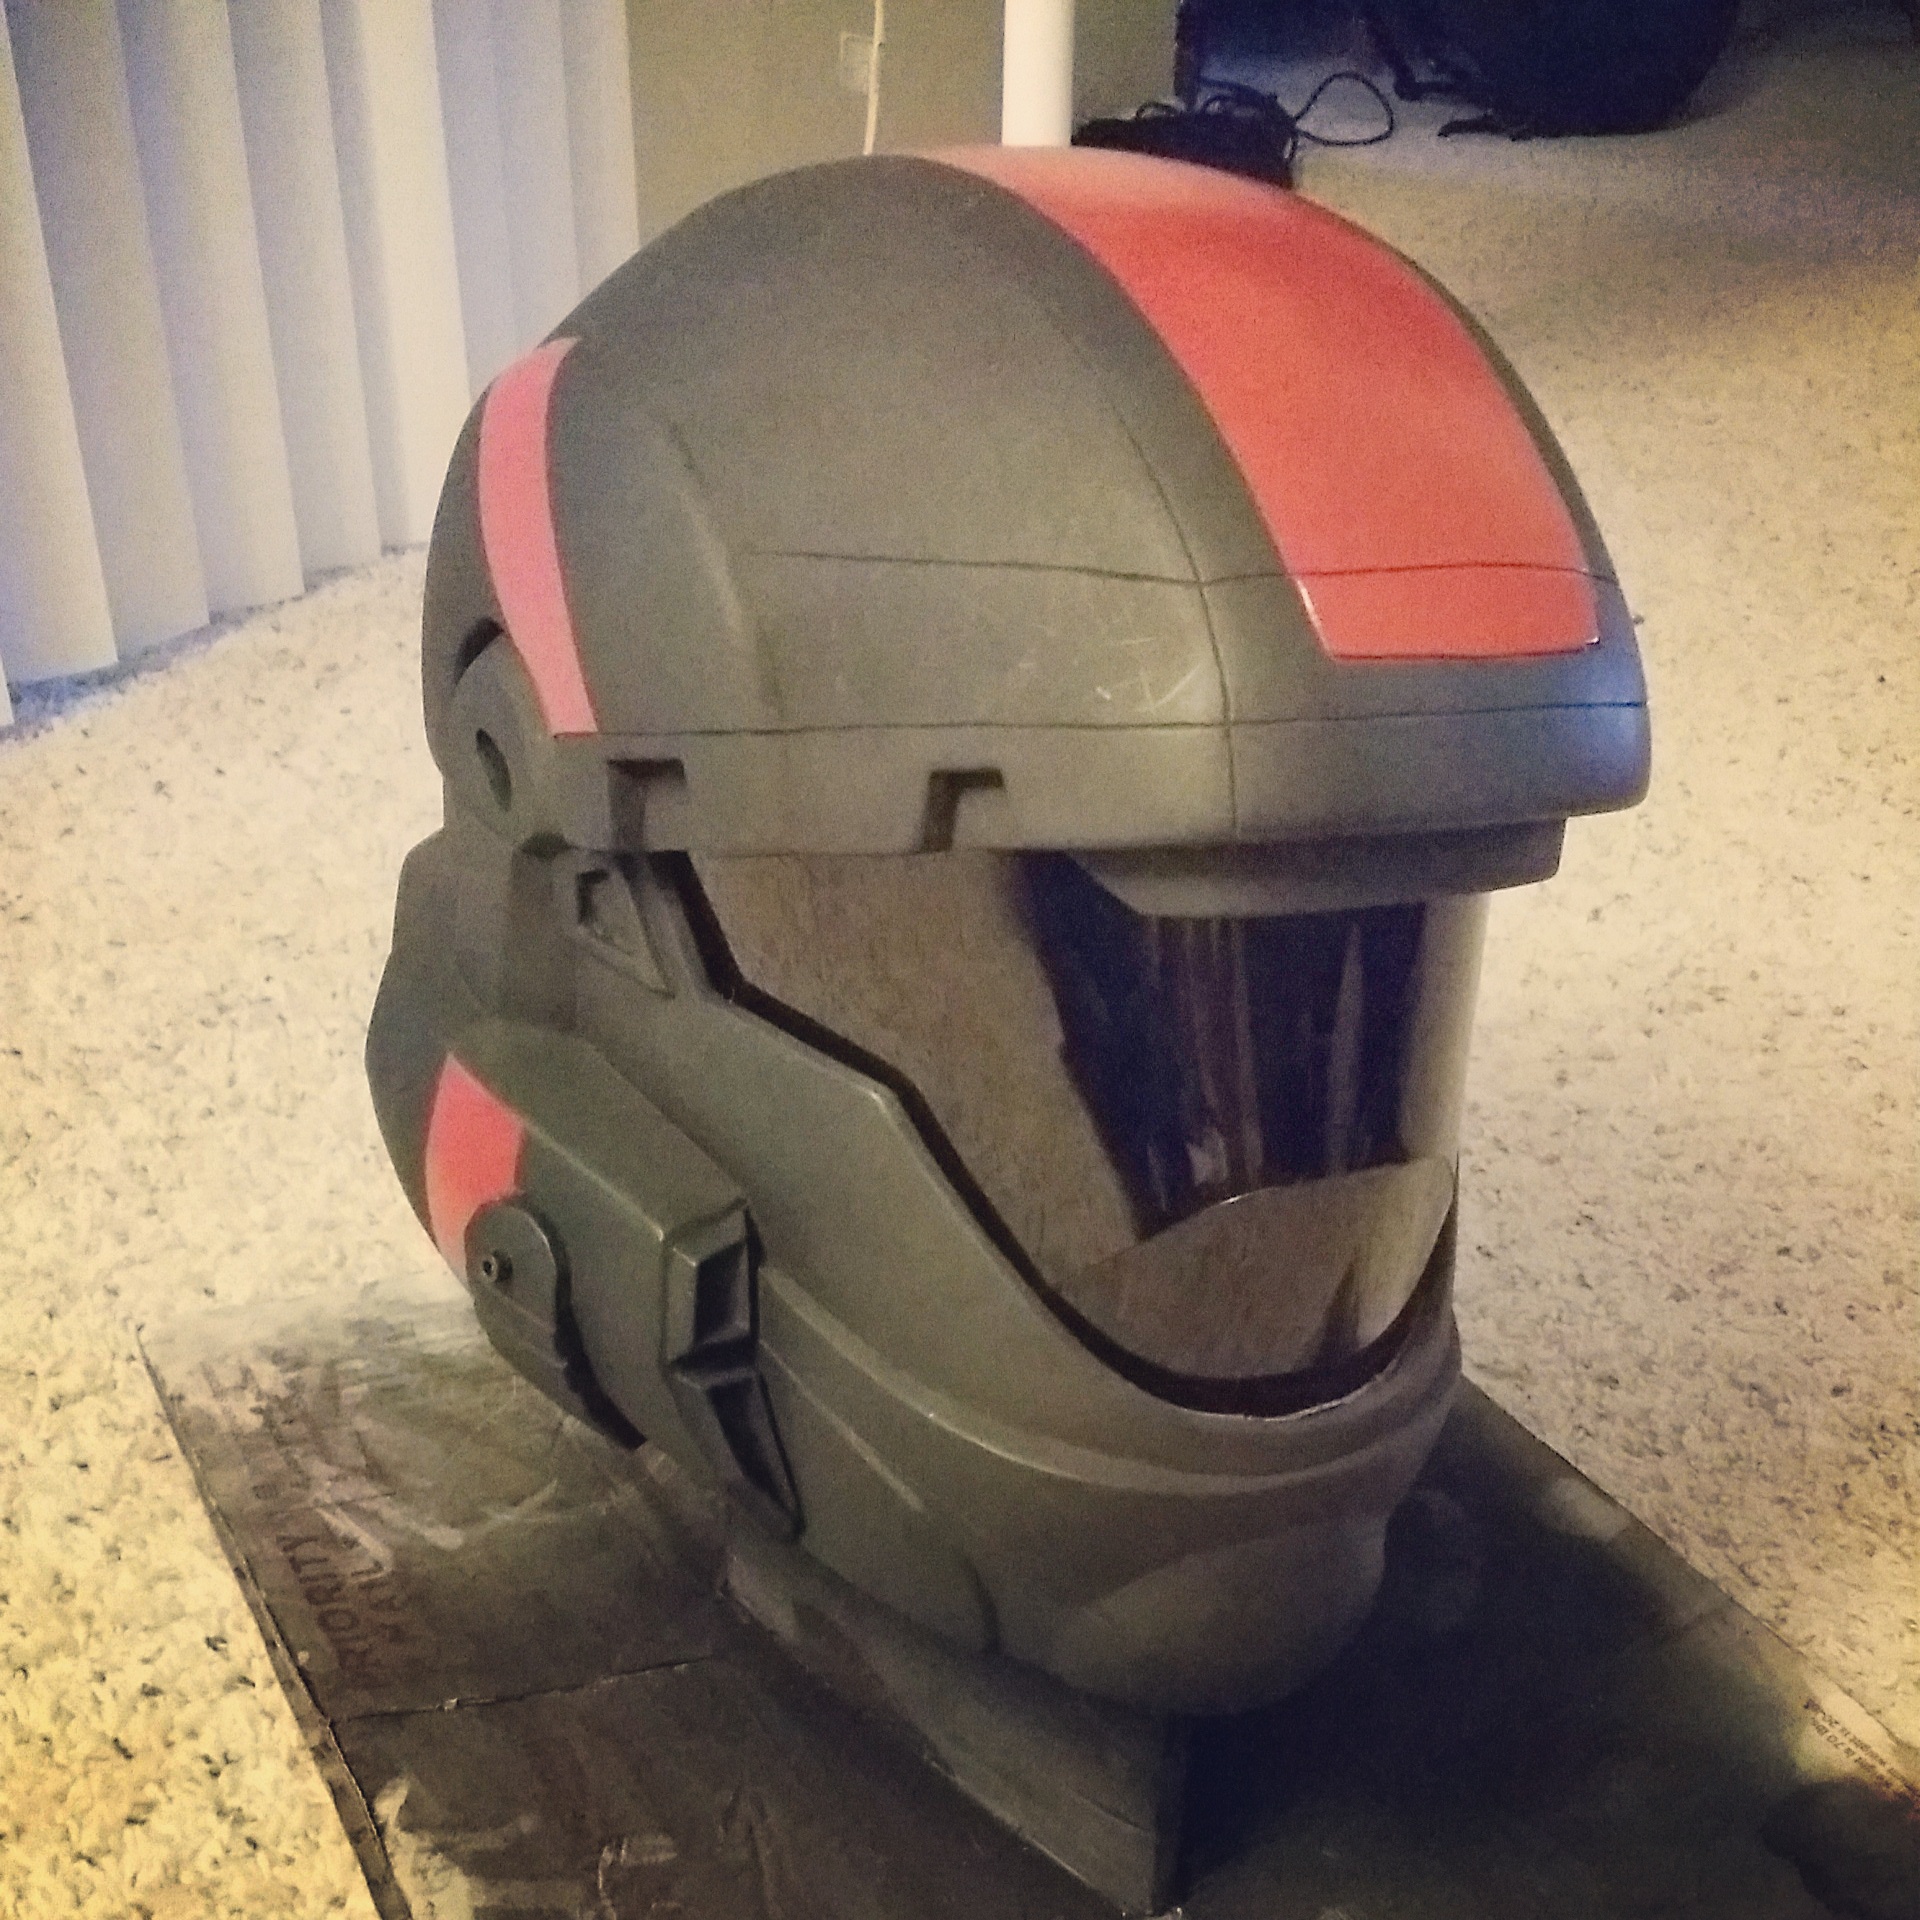 Helmet with final paint detailing. Weather to be added soon